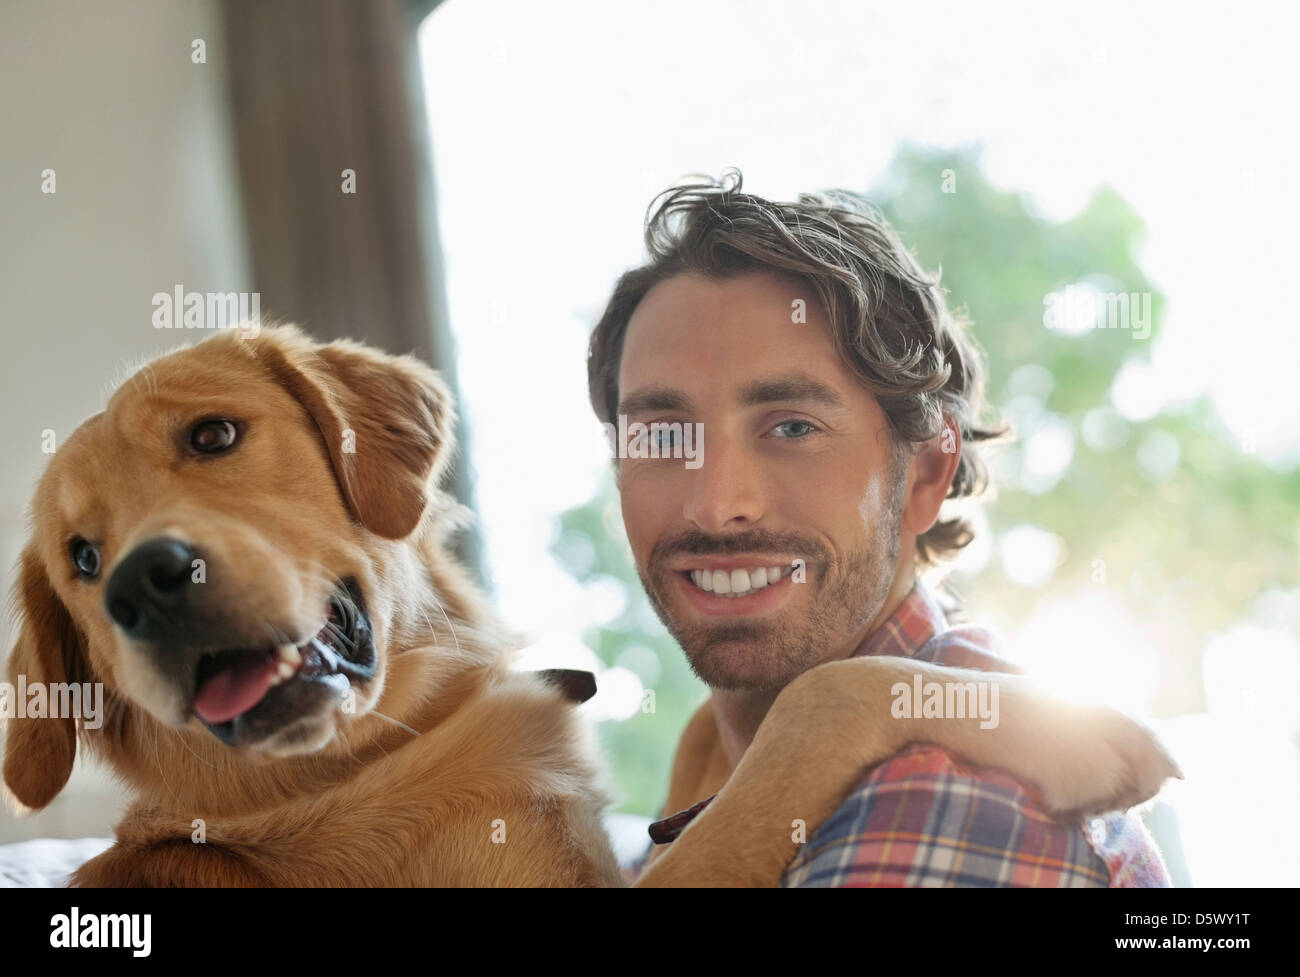 Smiling man petting dog indoors Banque D'Images